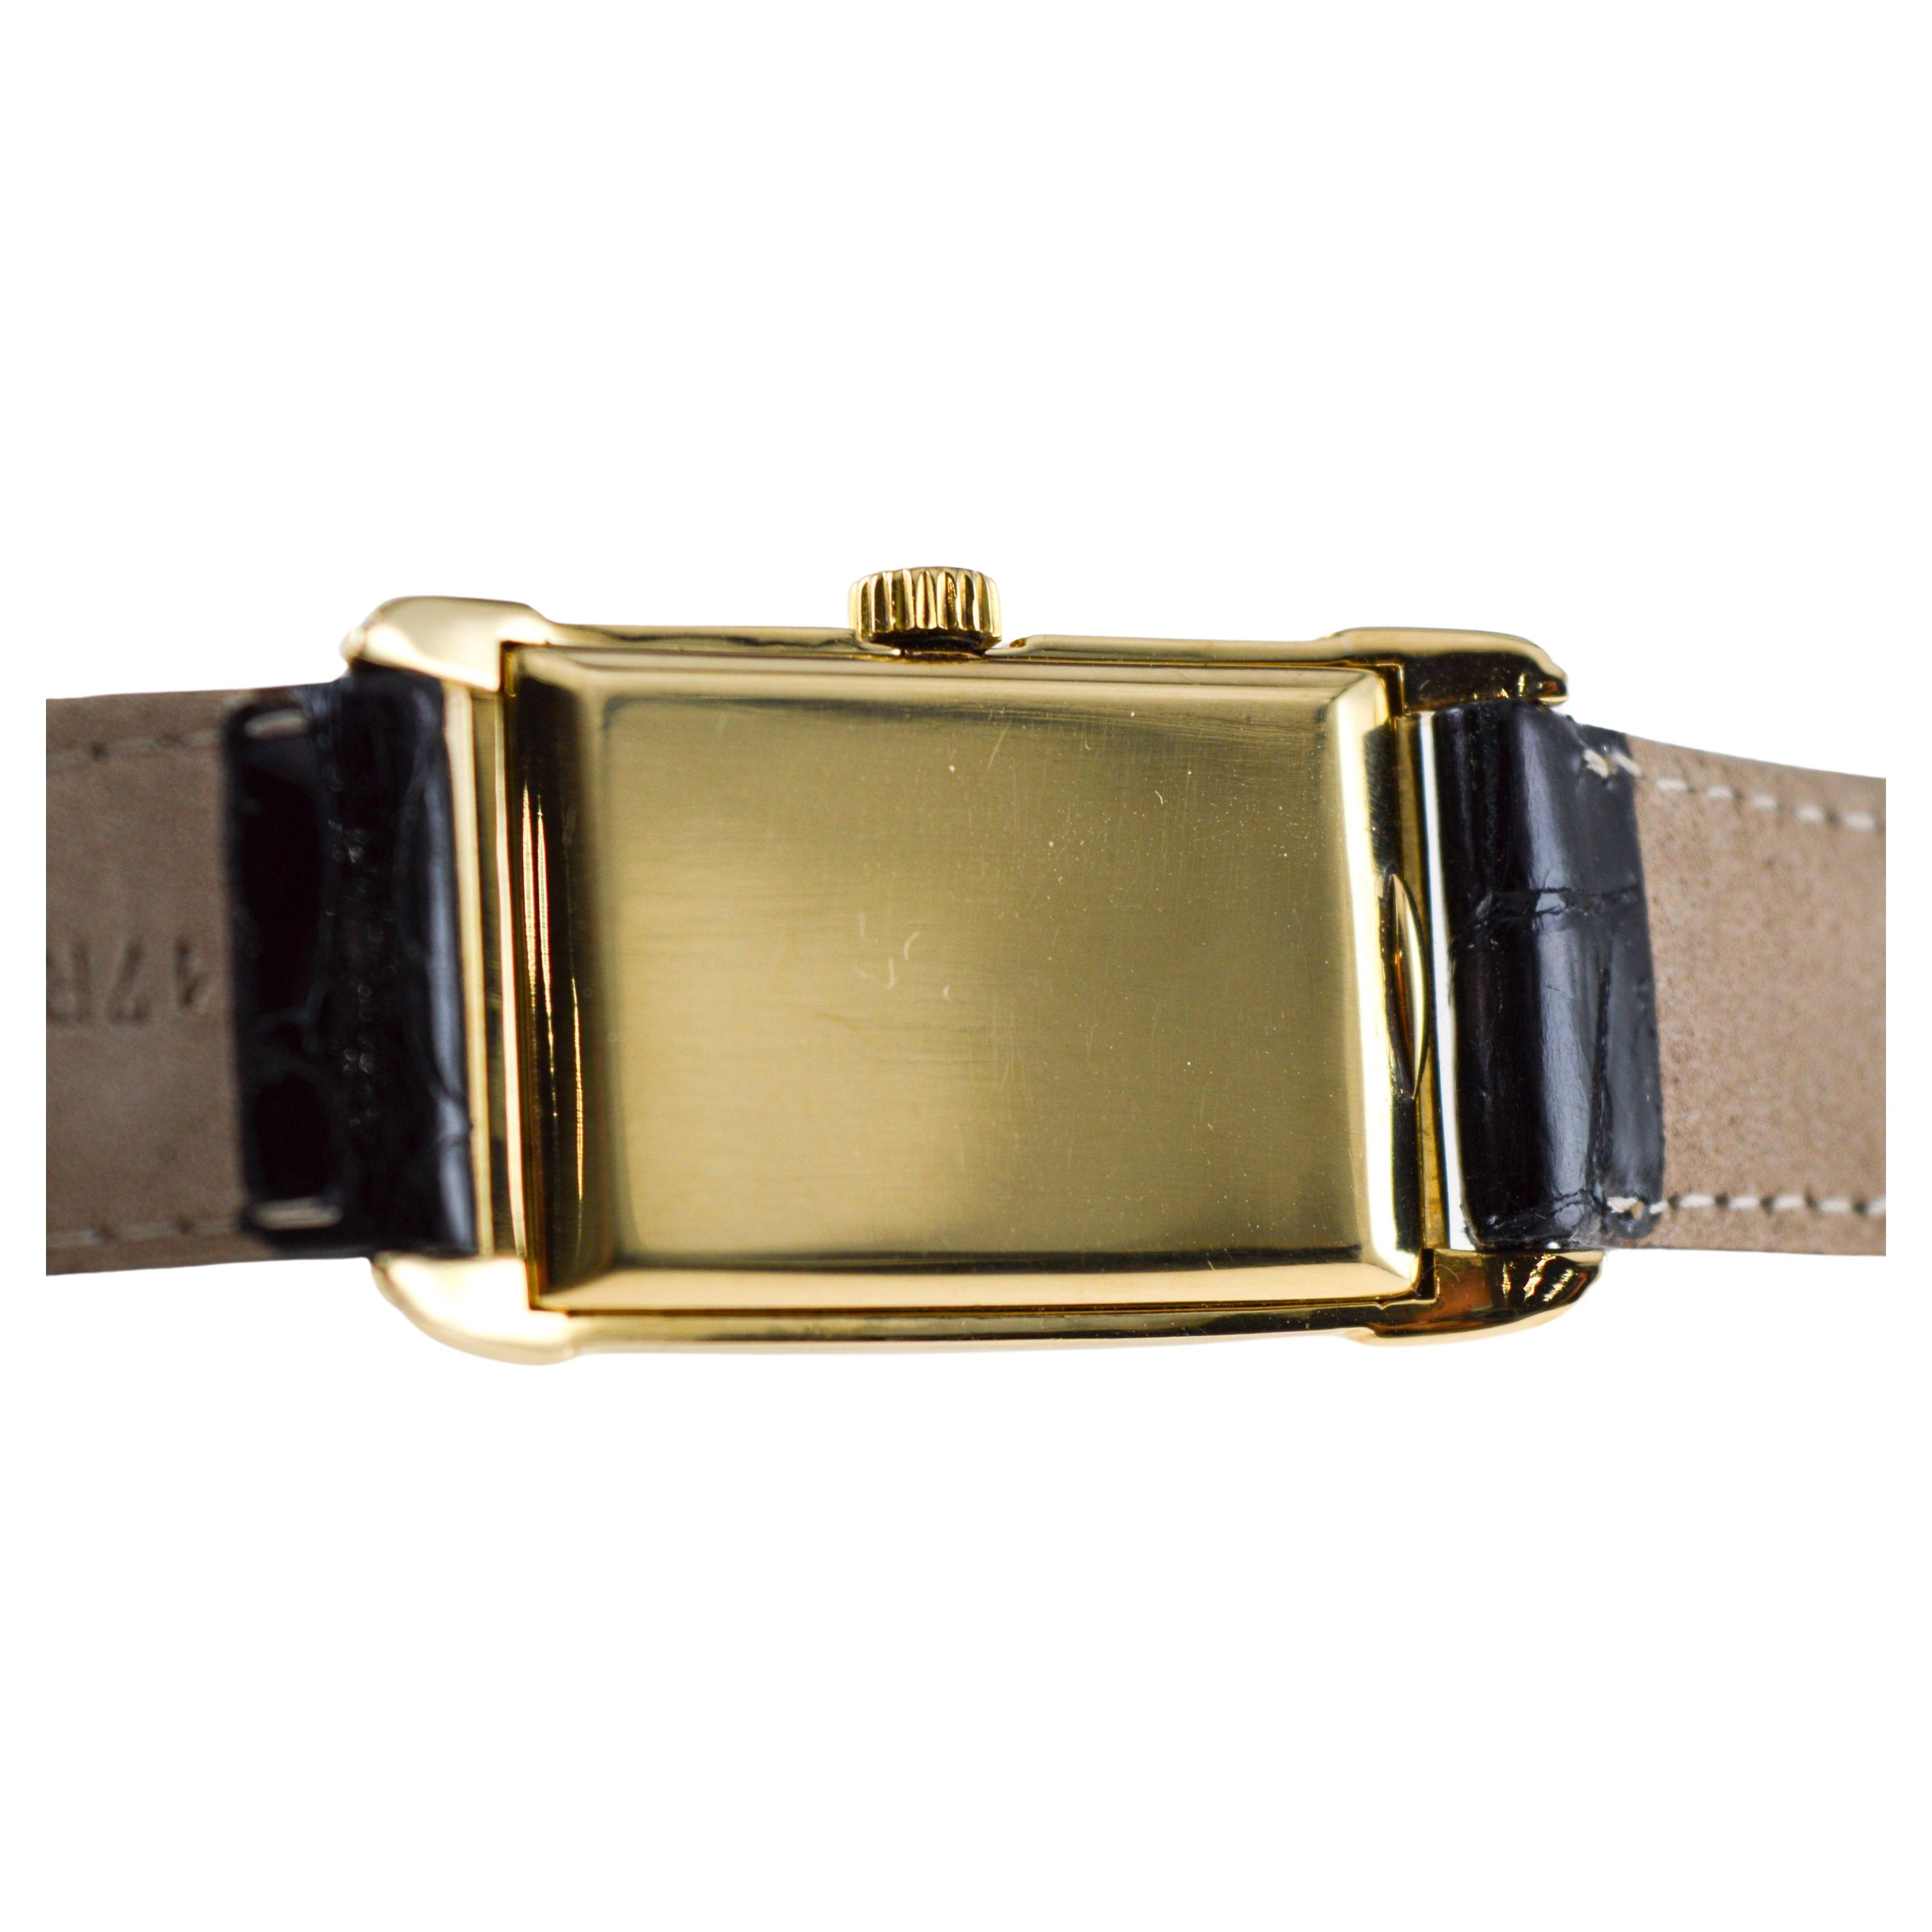 Patek Philippe Yellow Gold Art Deco Style Manual Watch, circa 1948 with Archival For Sale 7